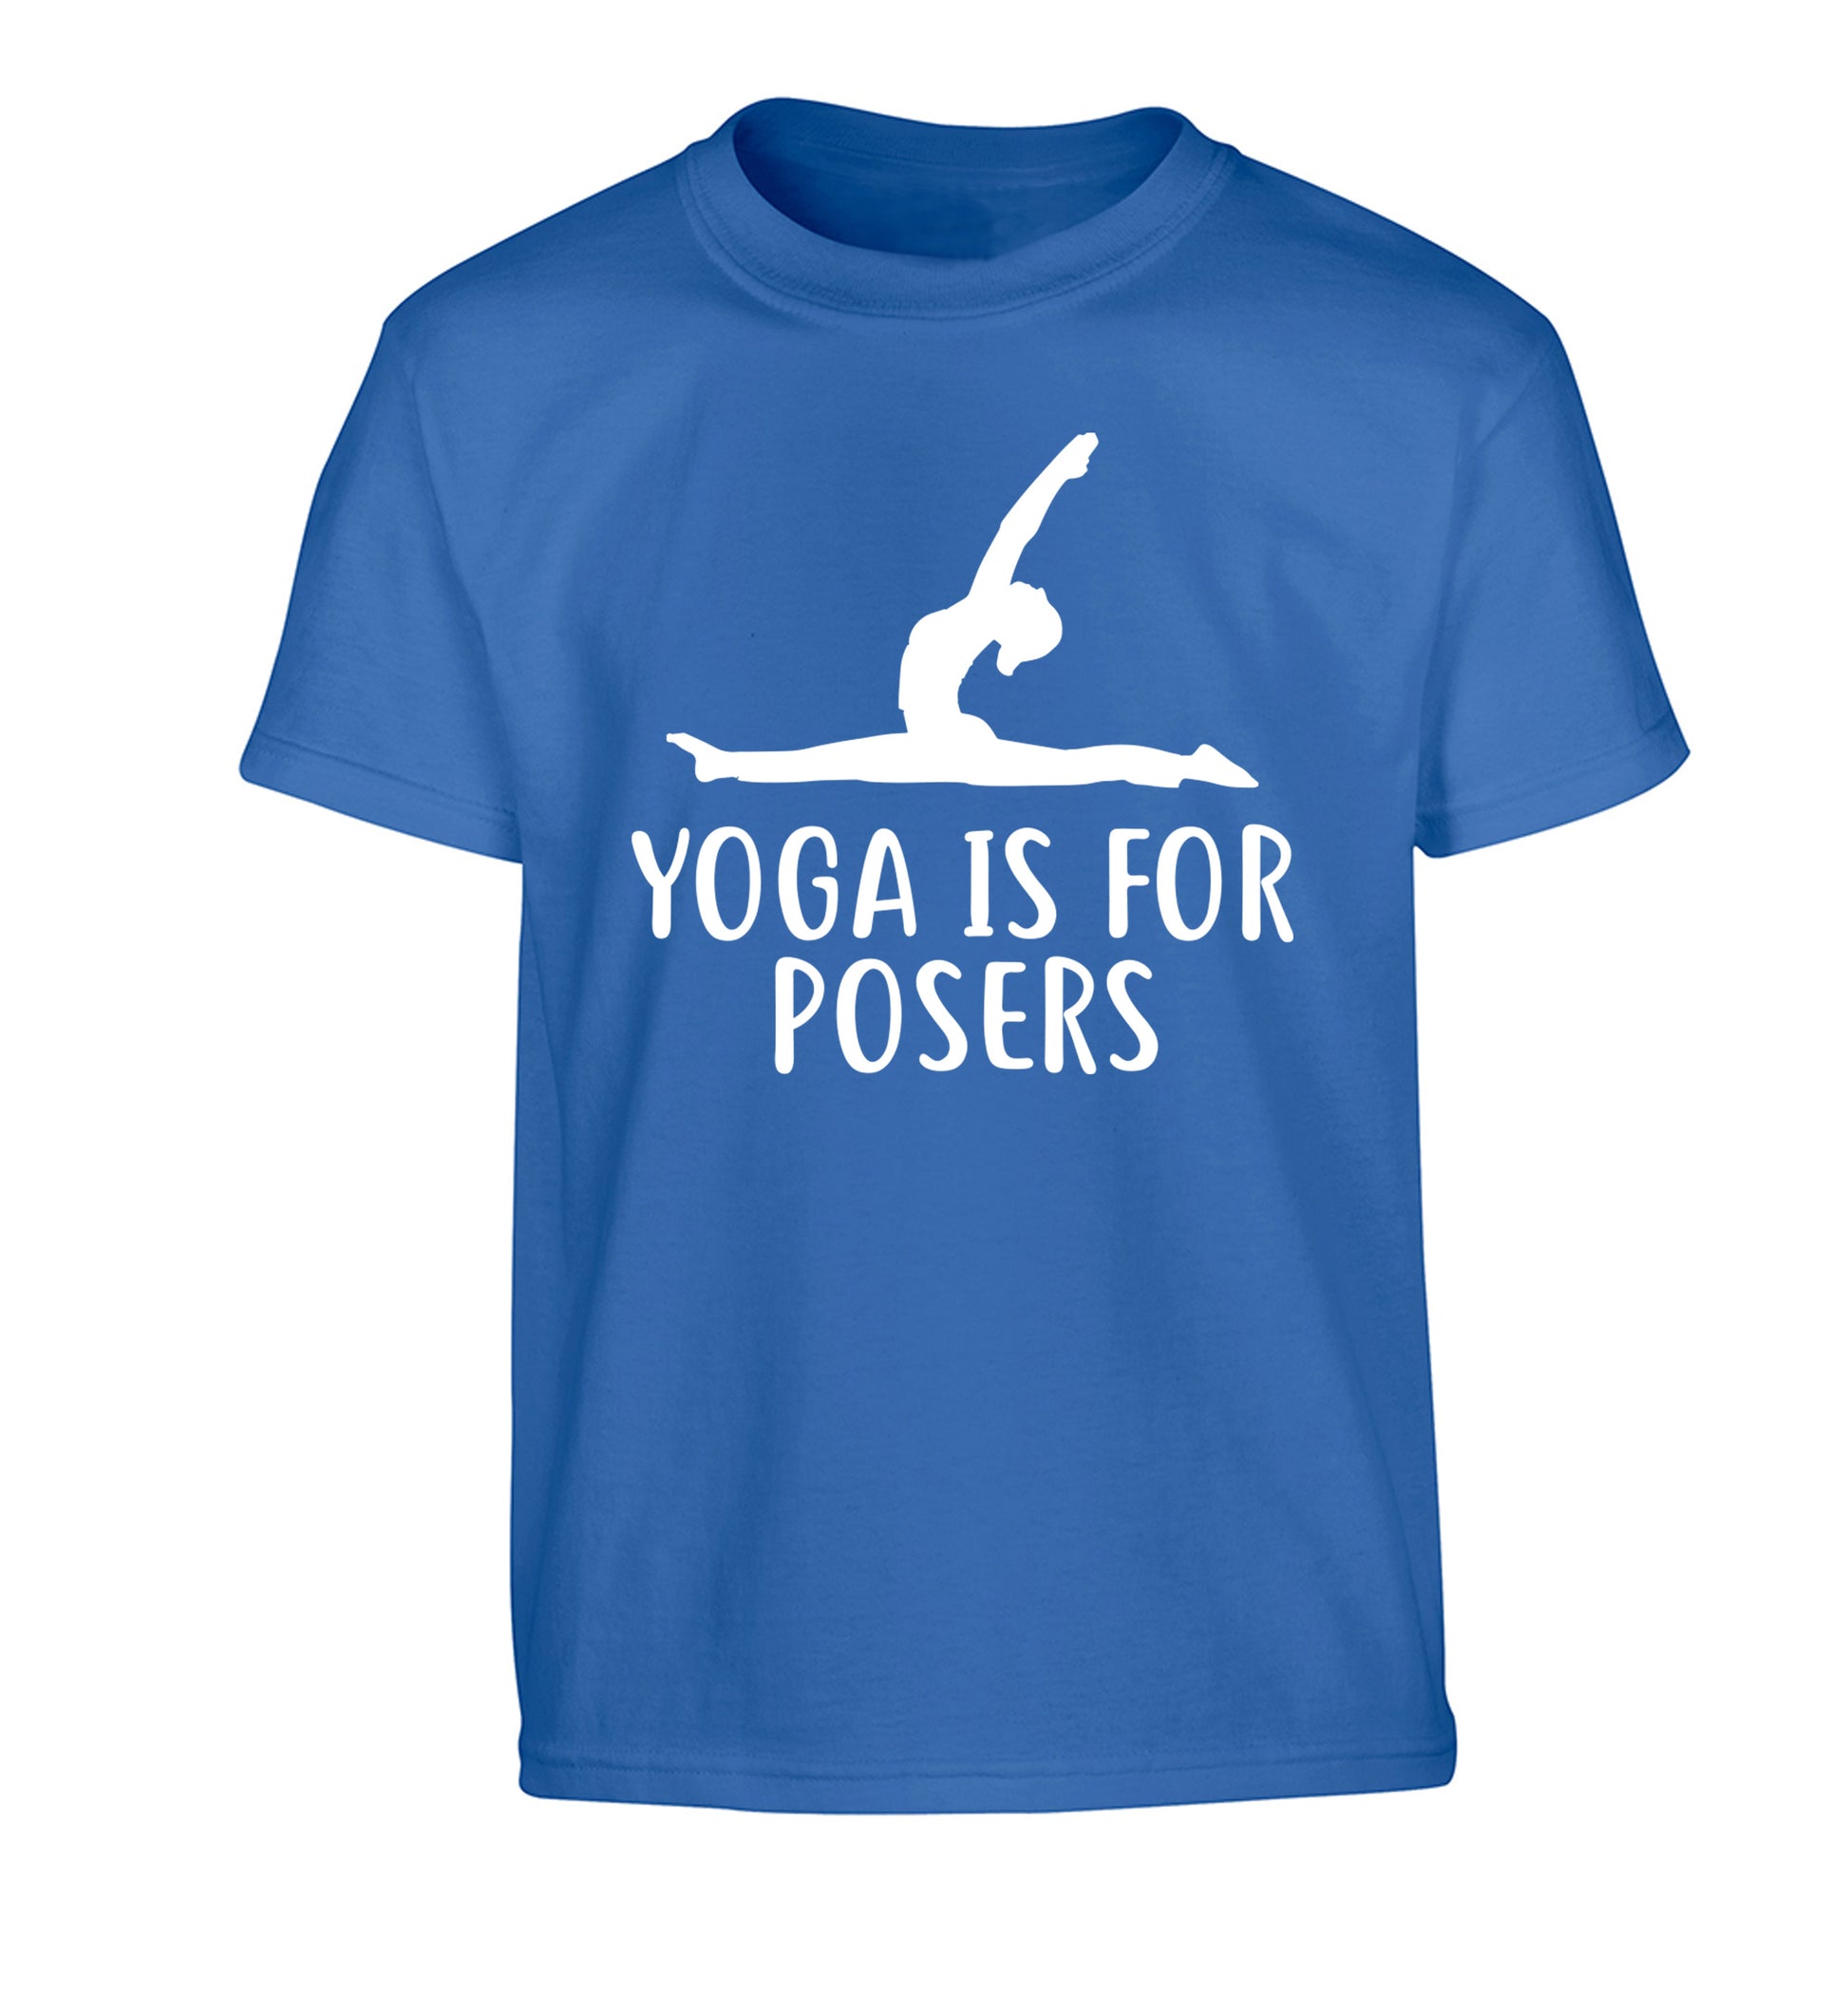 Yoga is for posers Children's blue Tshirt 12-13 Years